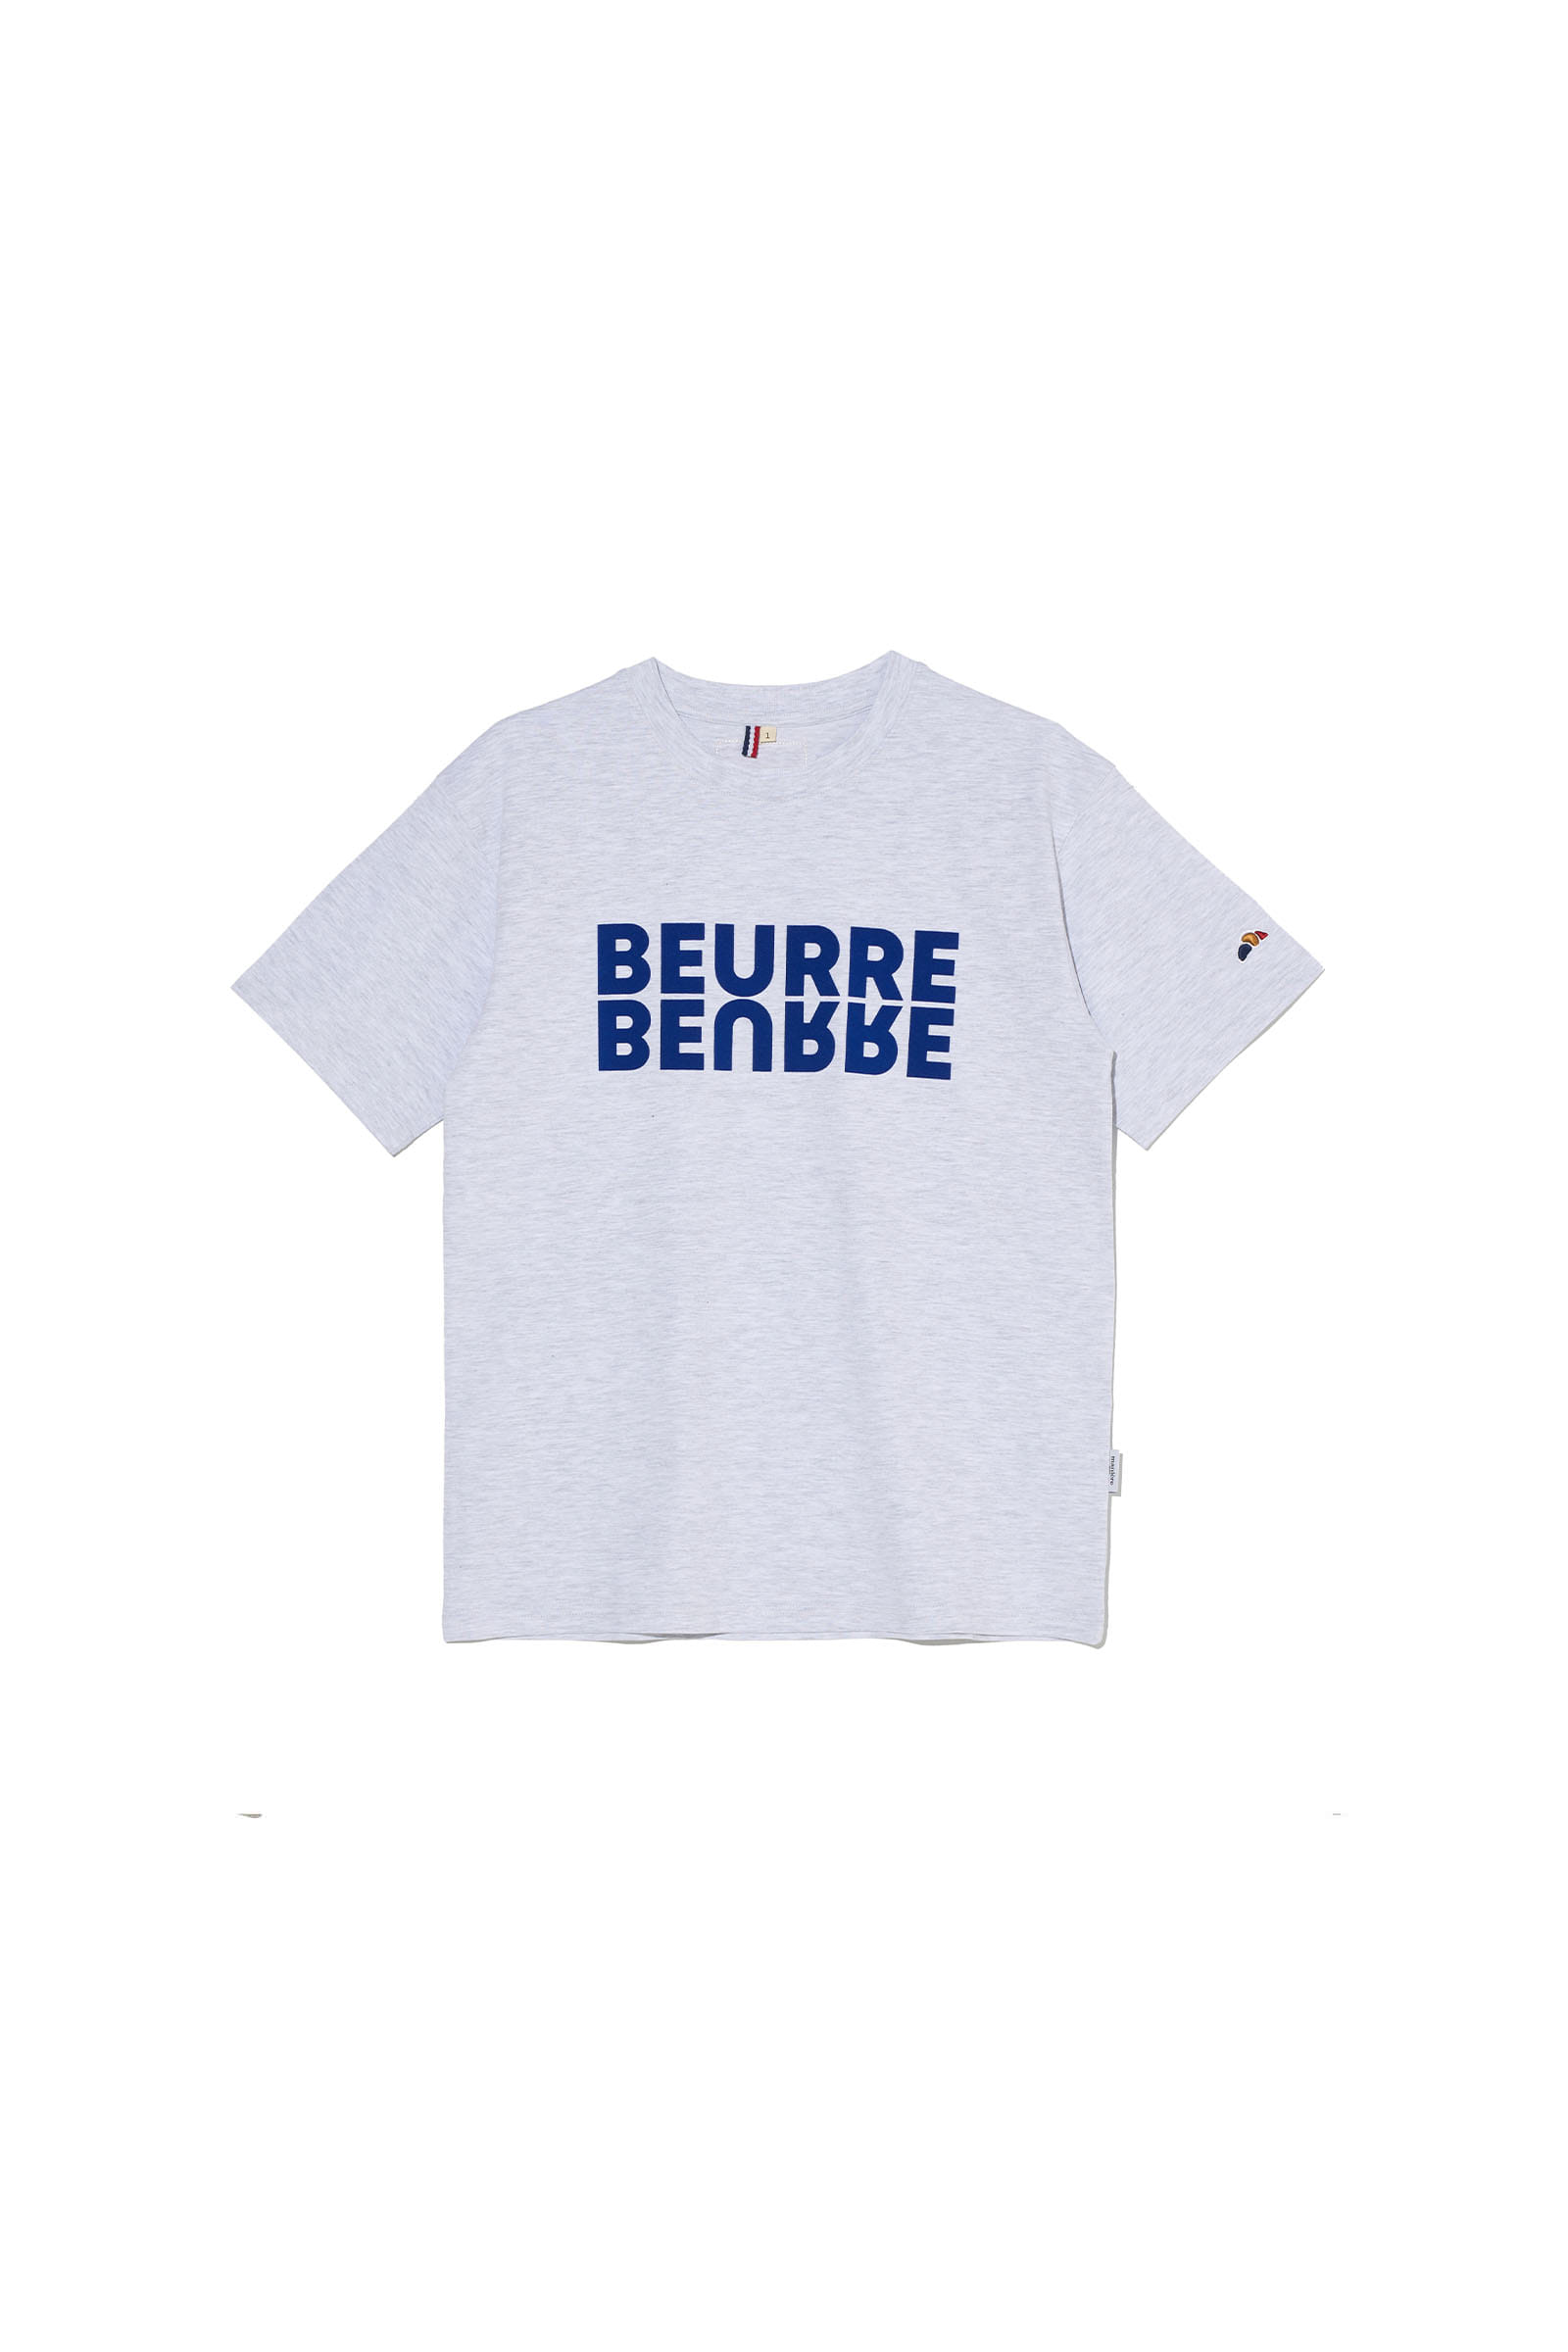 ep.6 BEURRE Decalcomanie T-shirts (Cool gray)